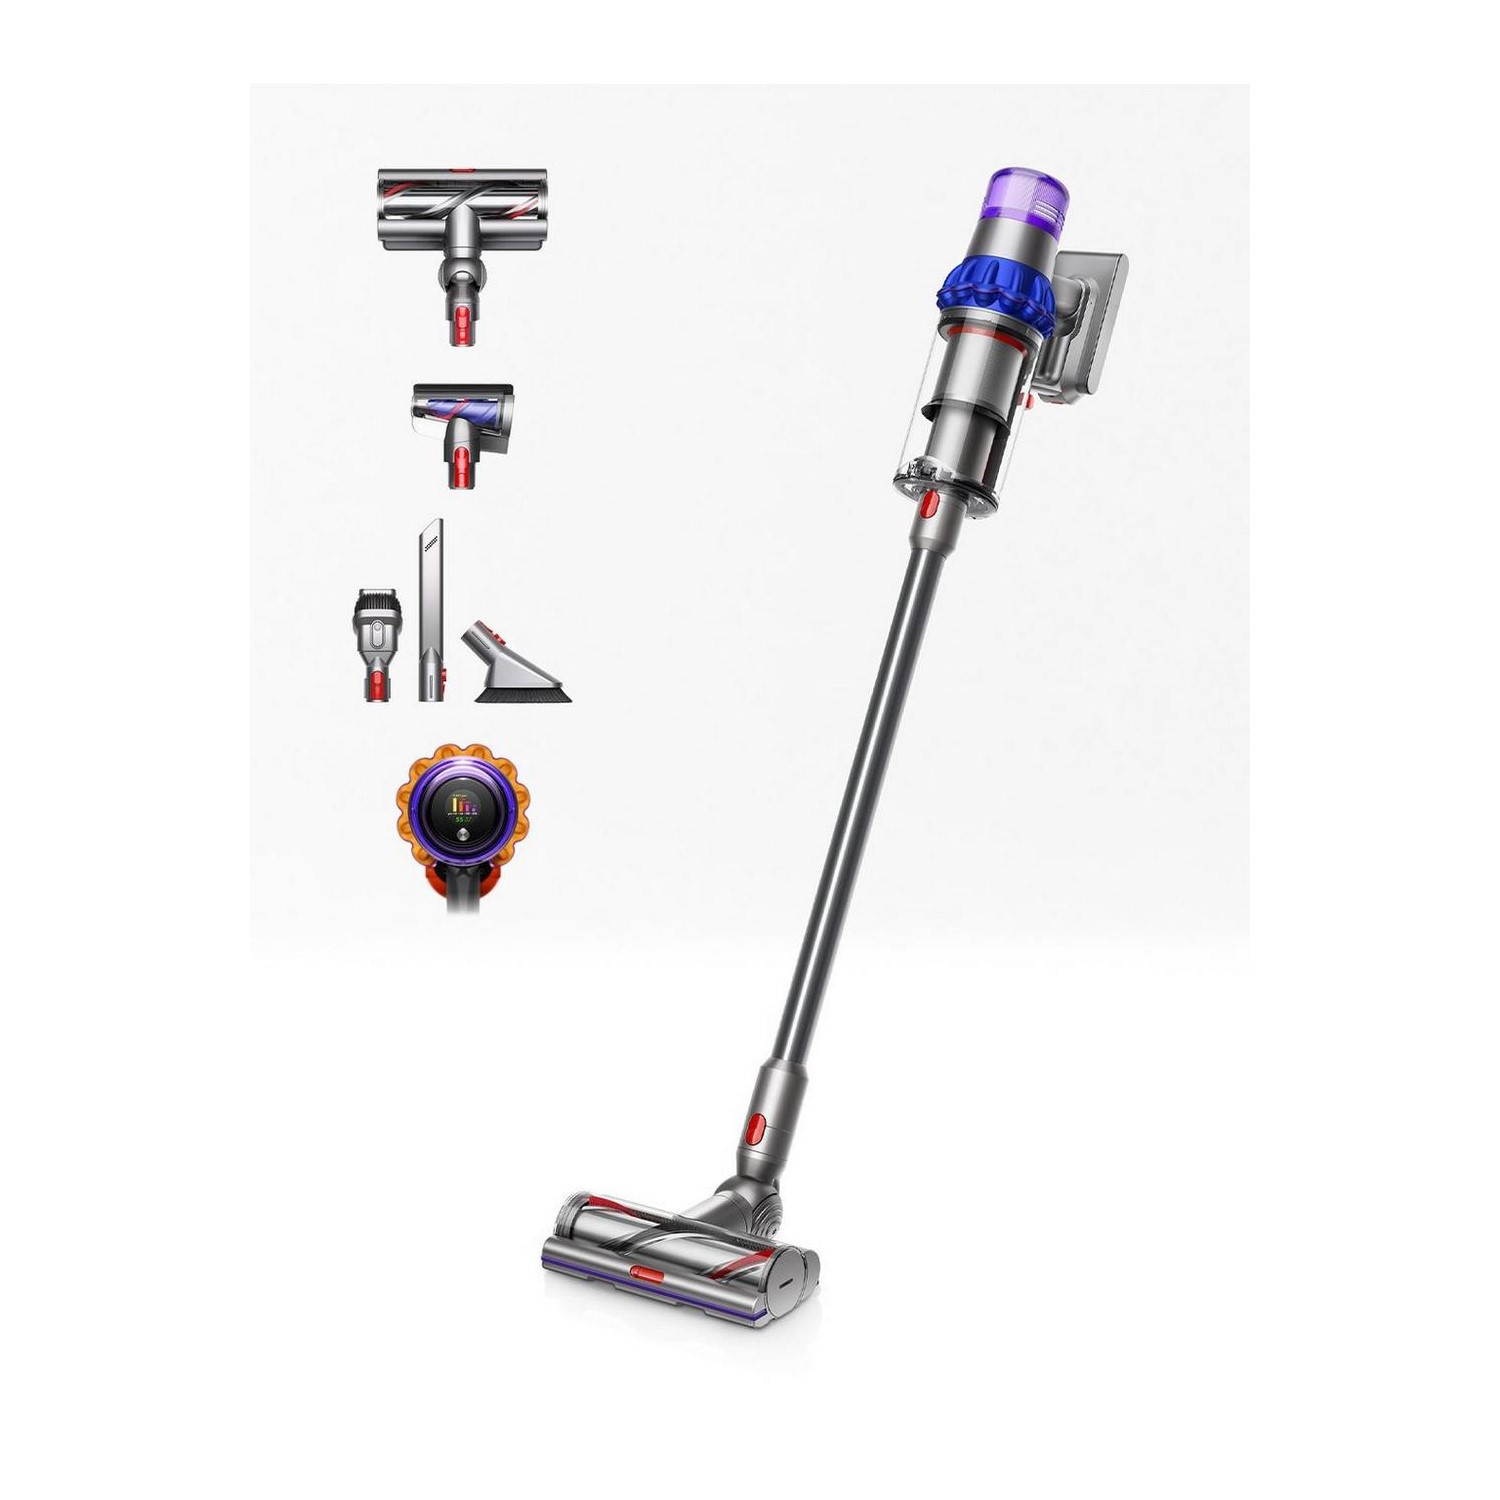 Dyson V15 Detect Animal Cordless Vacuum Cleaner with 60 Minute Run Time